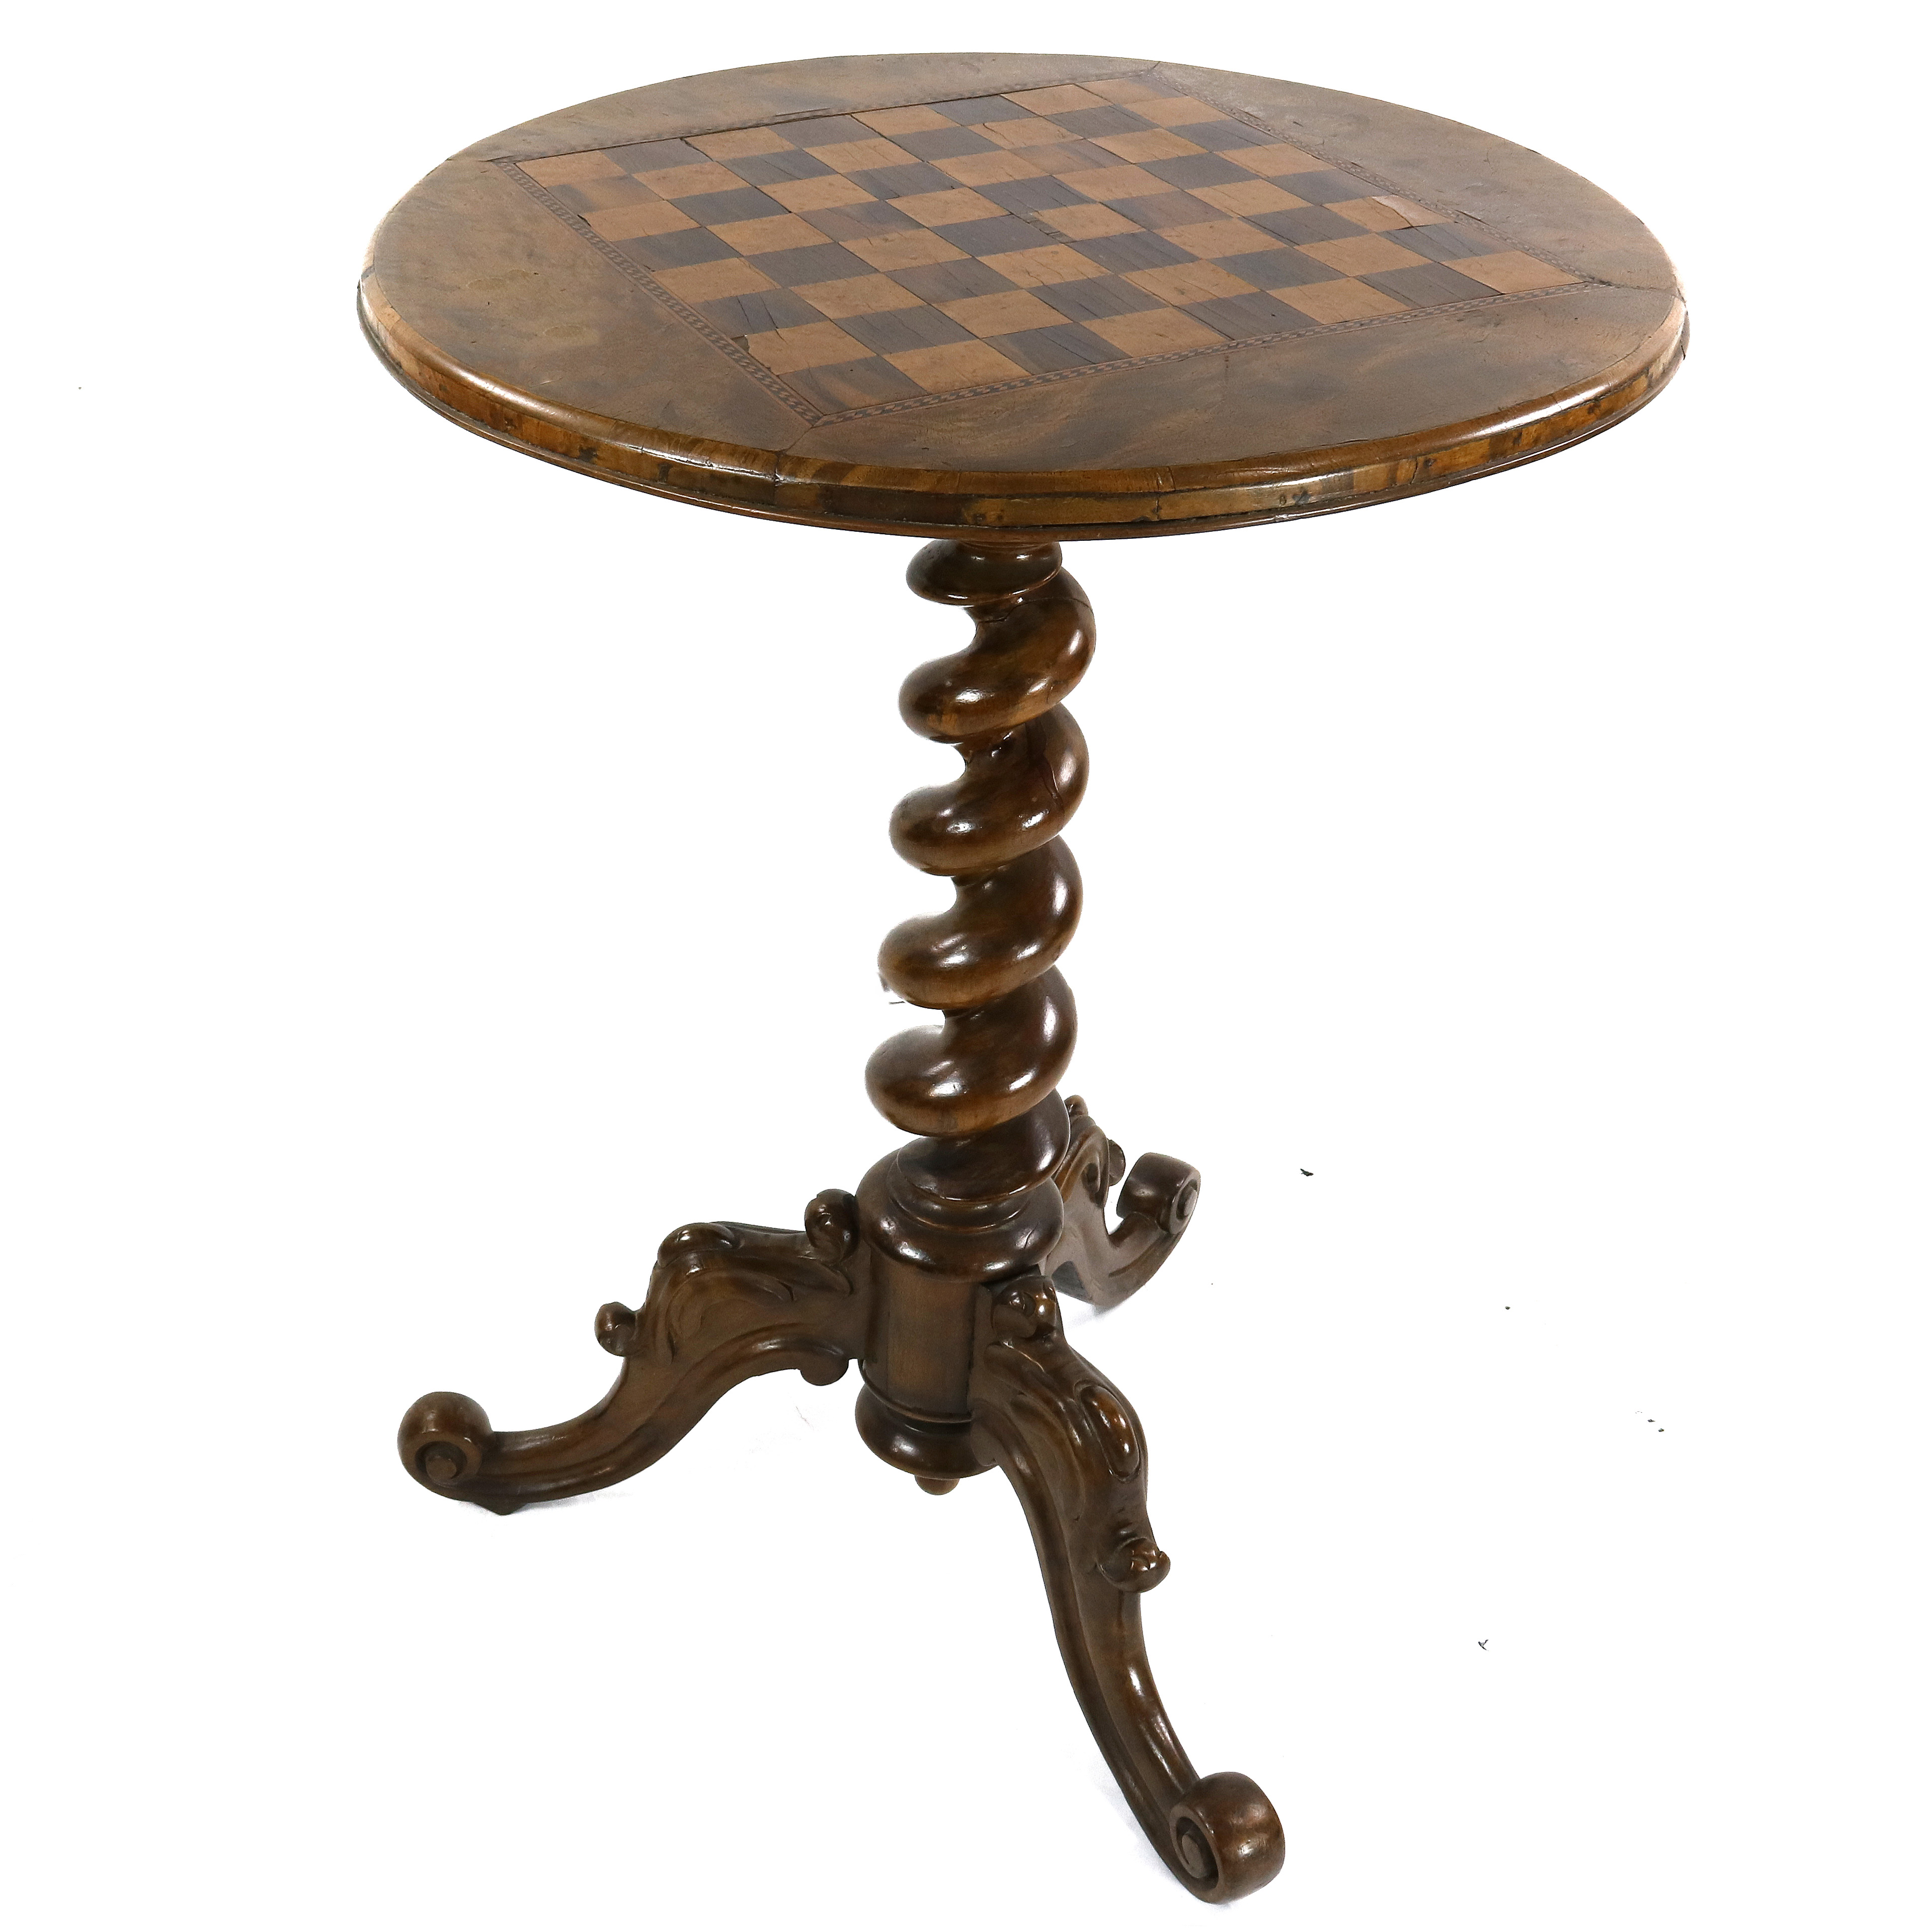 A CONTINETAL INLAID GAMES TABLE